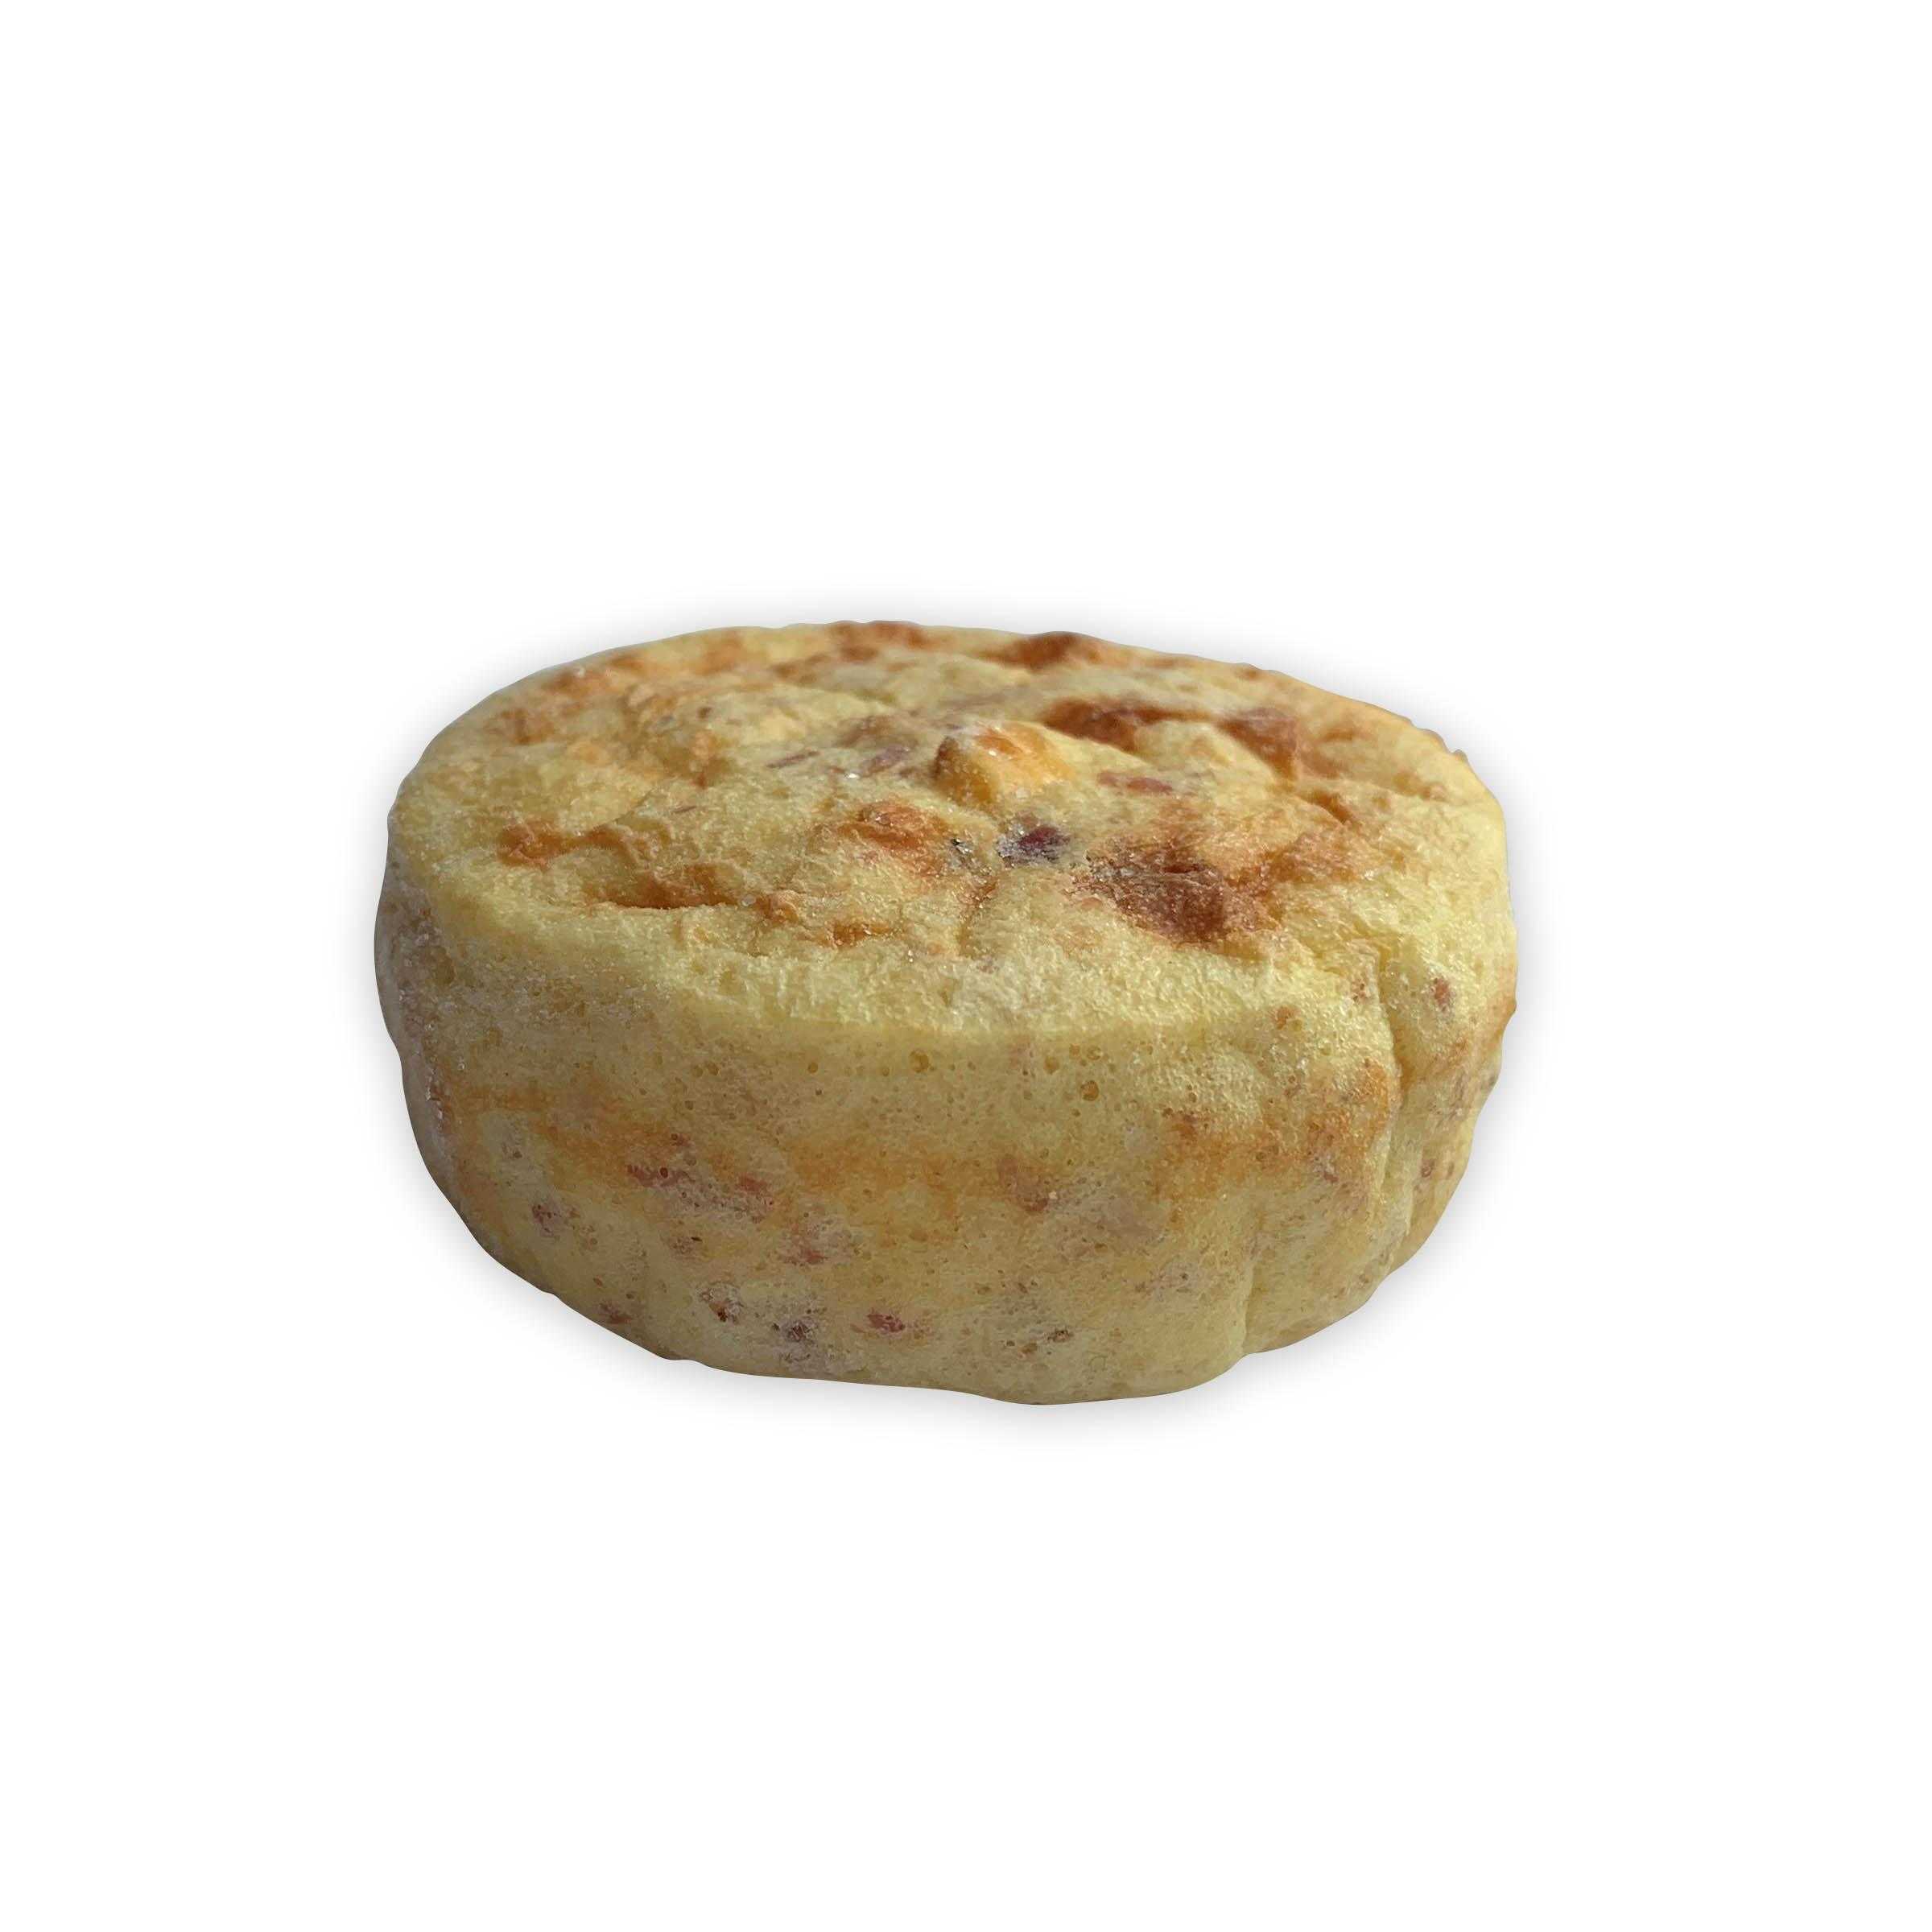 Abbotsford Farms® American Humane Certified Cage Free Fully Cooked Cheese and Bacon Egg Bite, 120/1.75oz.